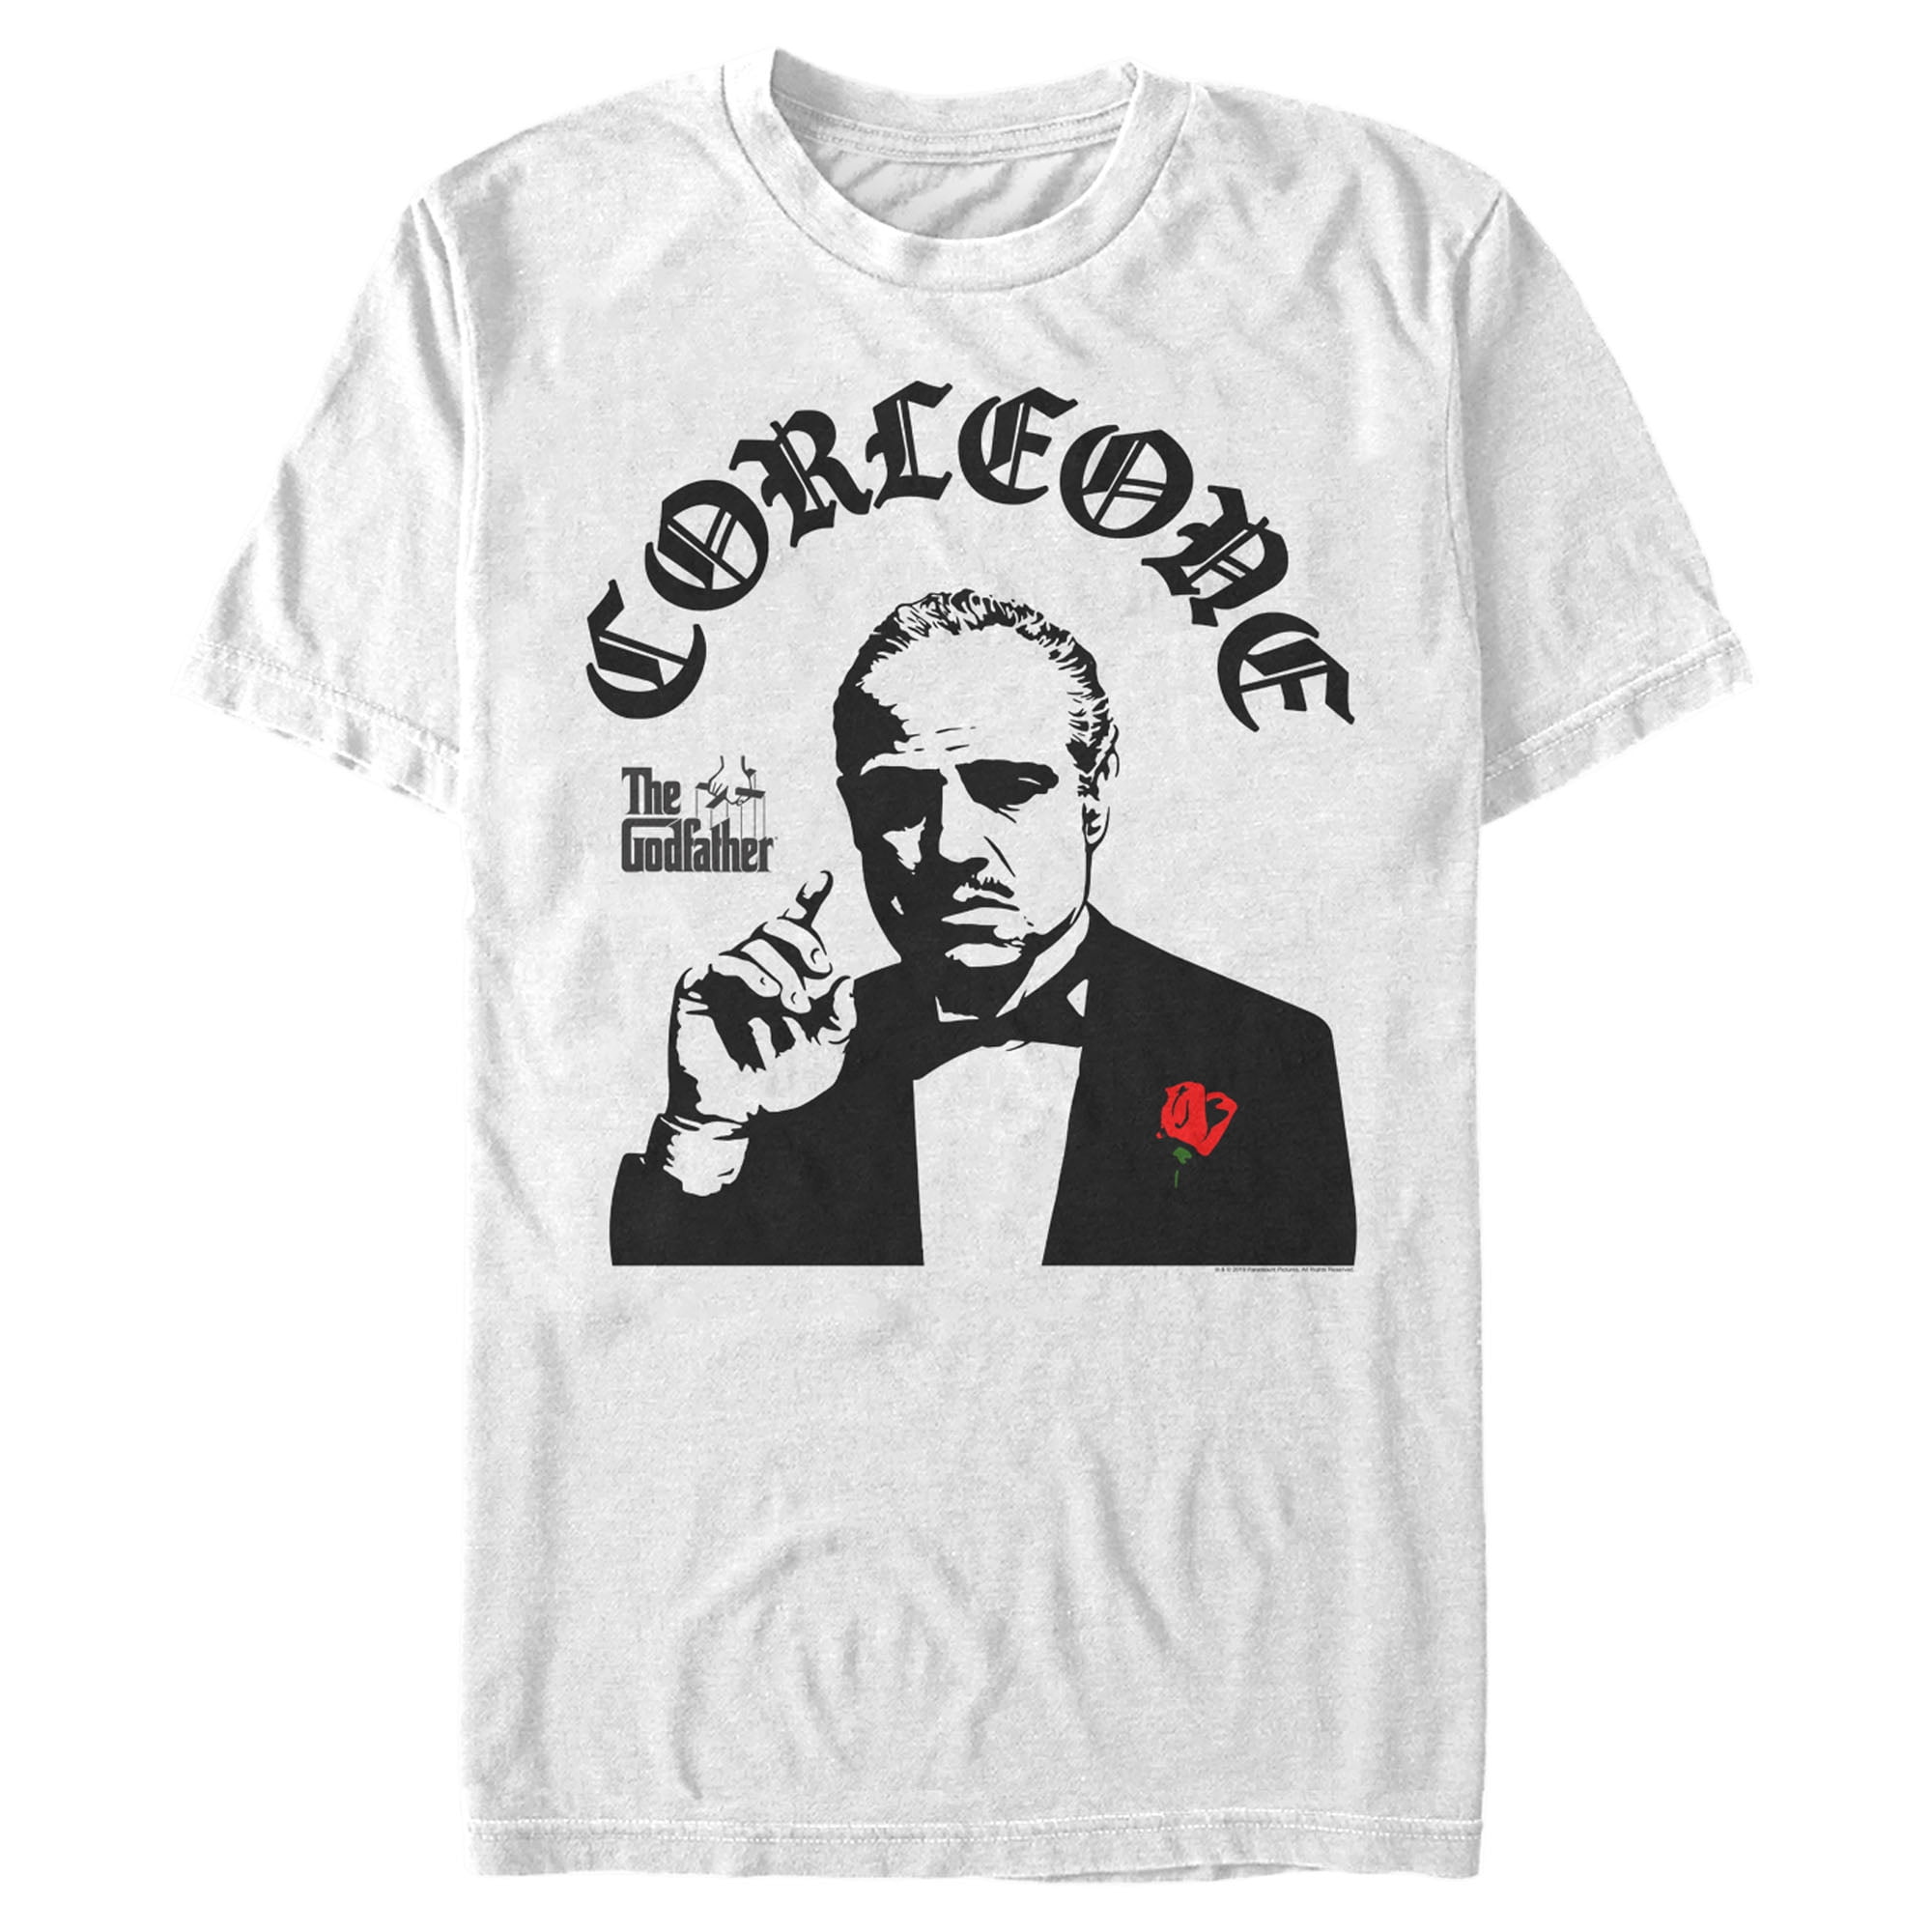 The Godfather - Men's The Godfather Corleone Classic Boss Graphic Tee ...